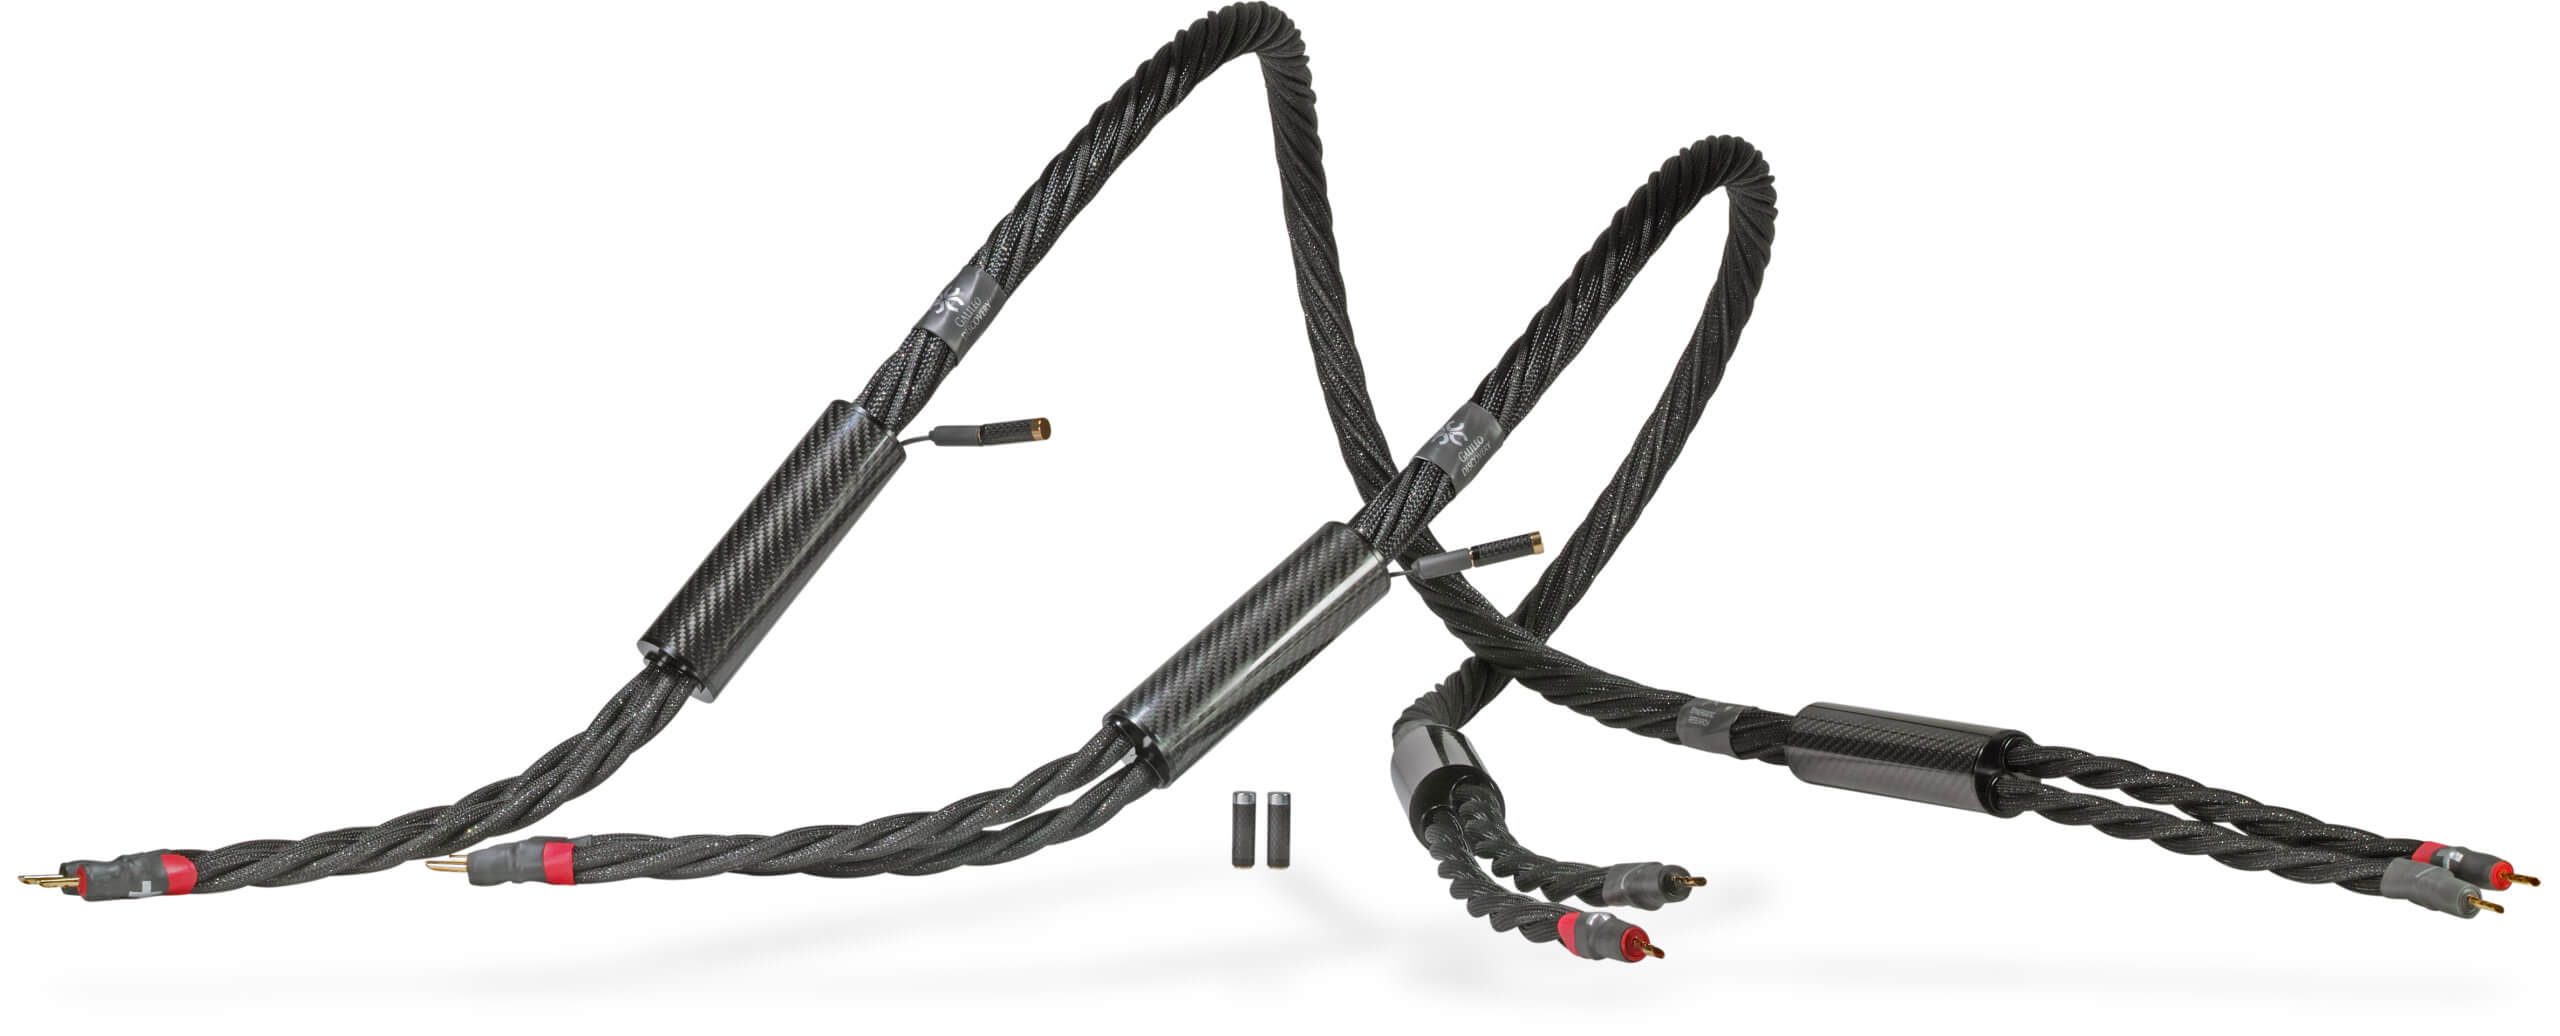 Galileo UEF A/C Power Cord — Perfection perfected.